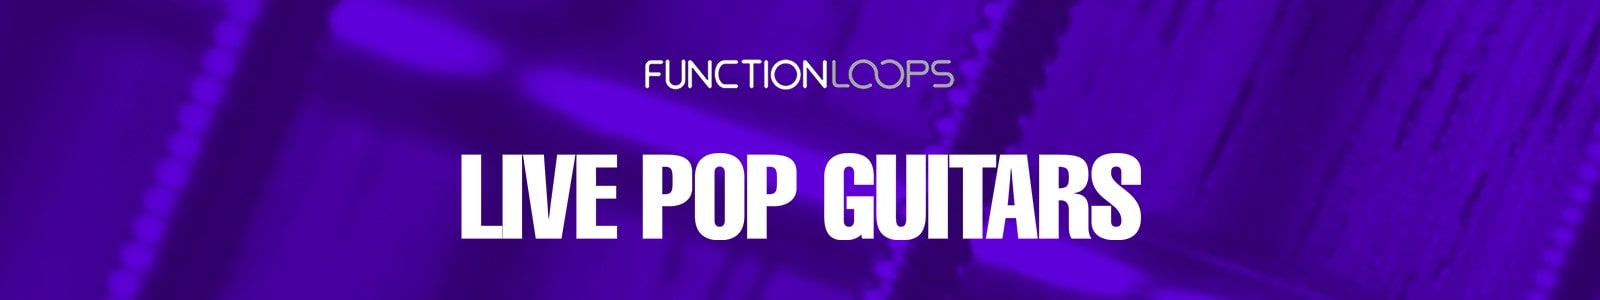 Live Pop Guitars by Function Loops